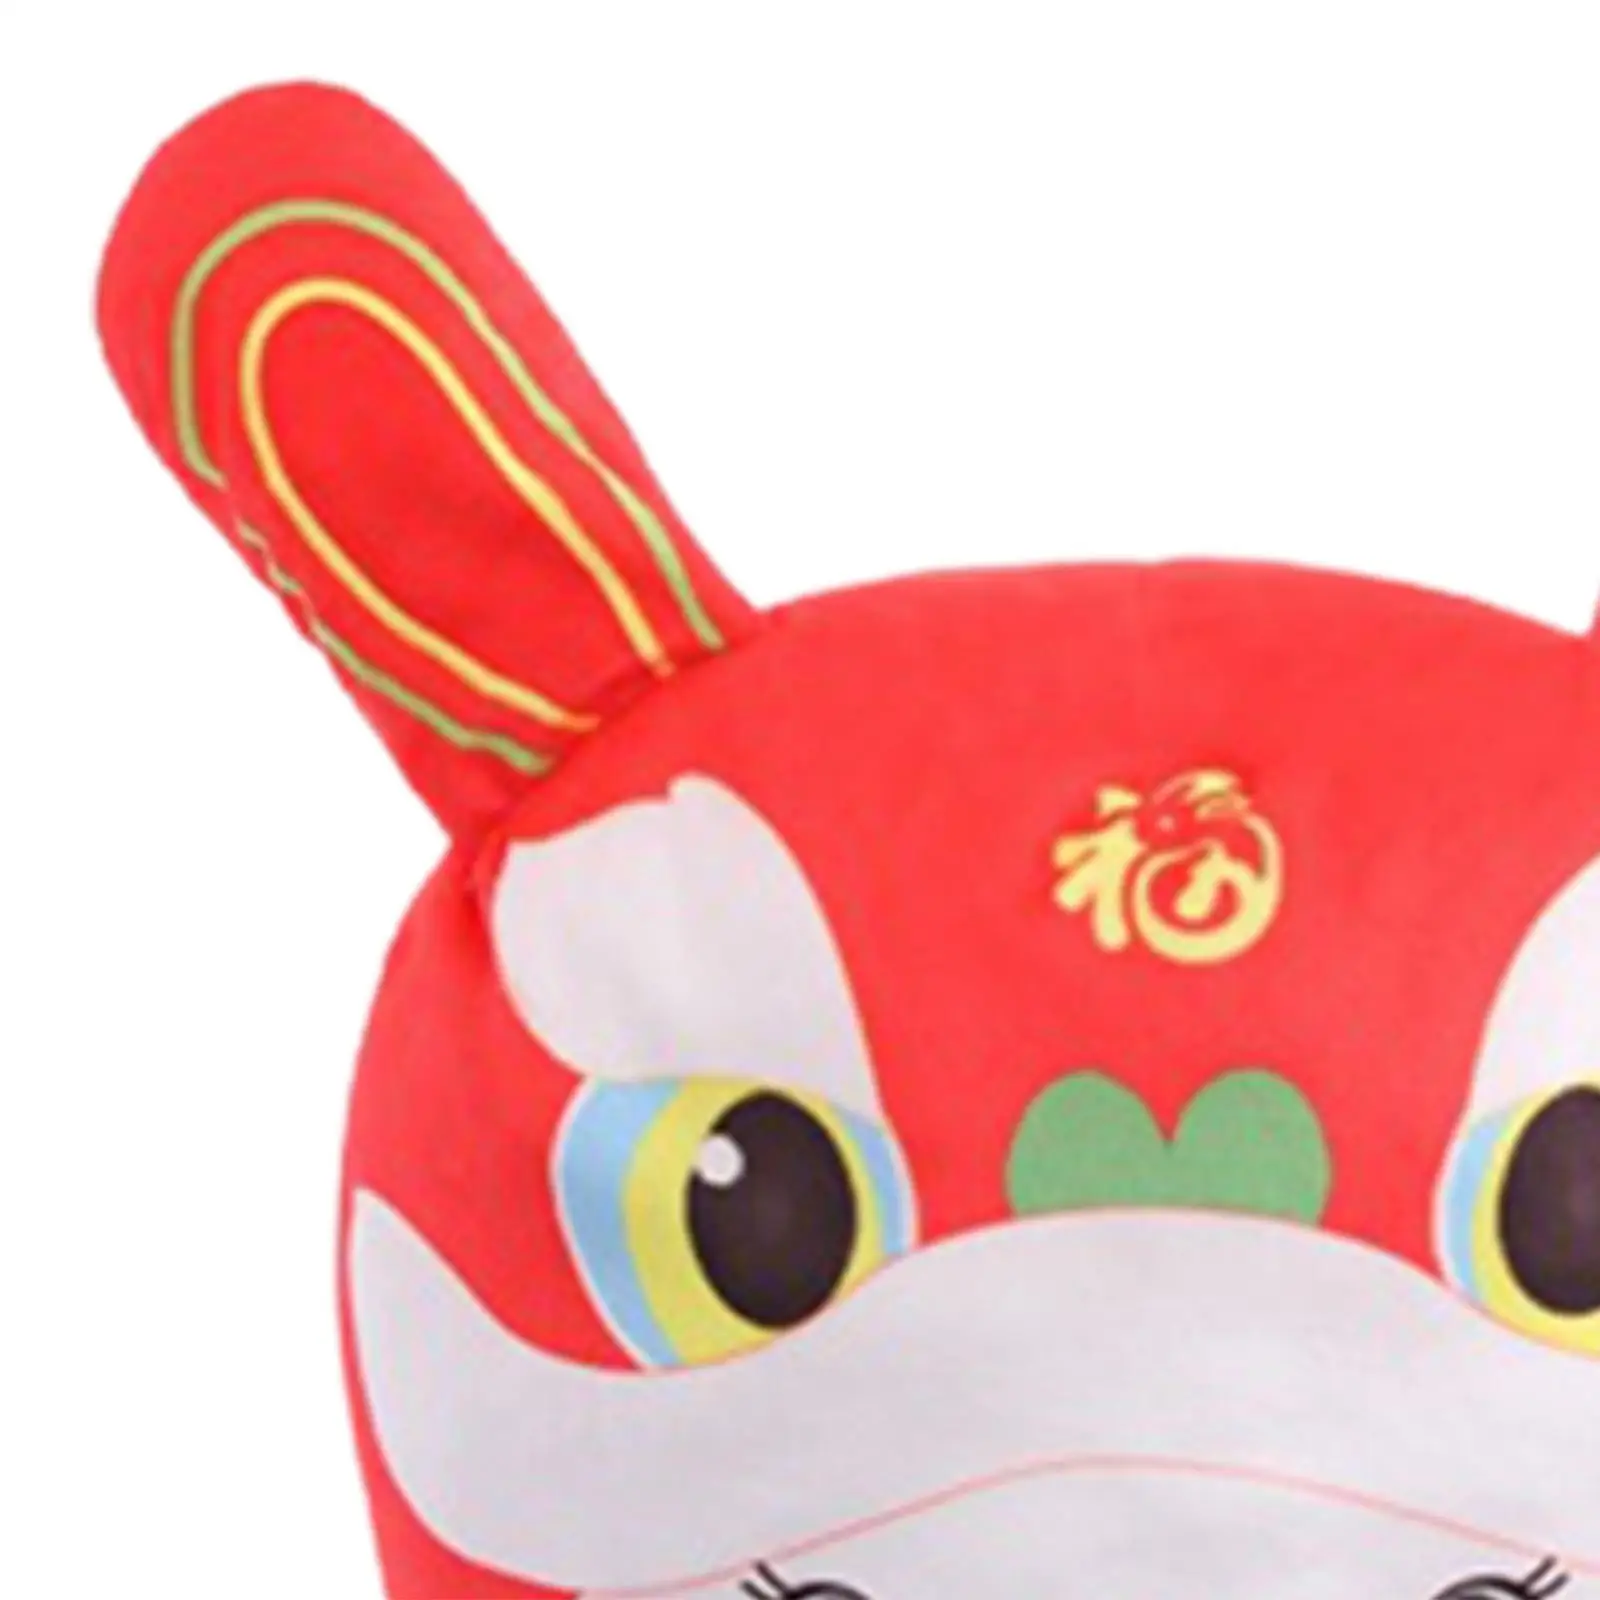 Lion Rabbit Plush Hat Gift Photo Prop Adult Kids Animal Hat Creative Headwear Comfortable Warm for Party Dress Cosplay